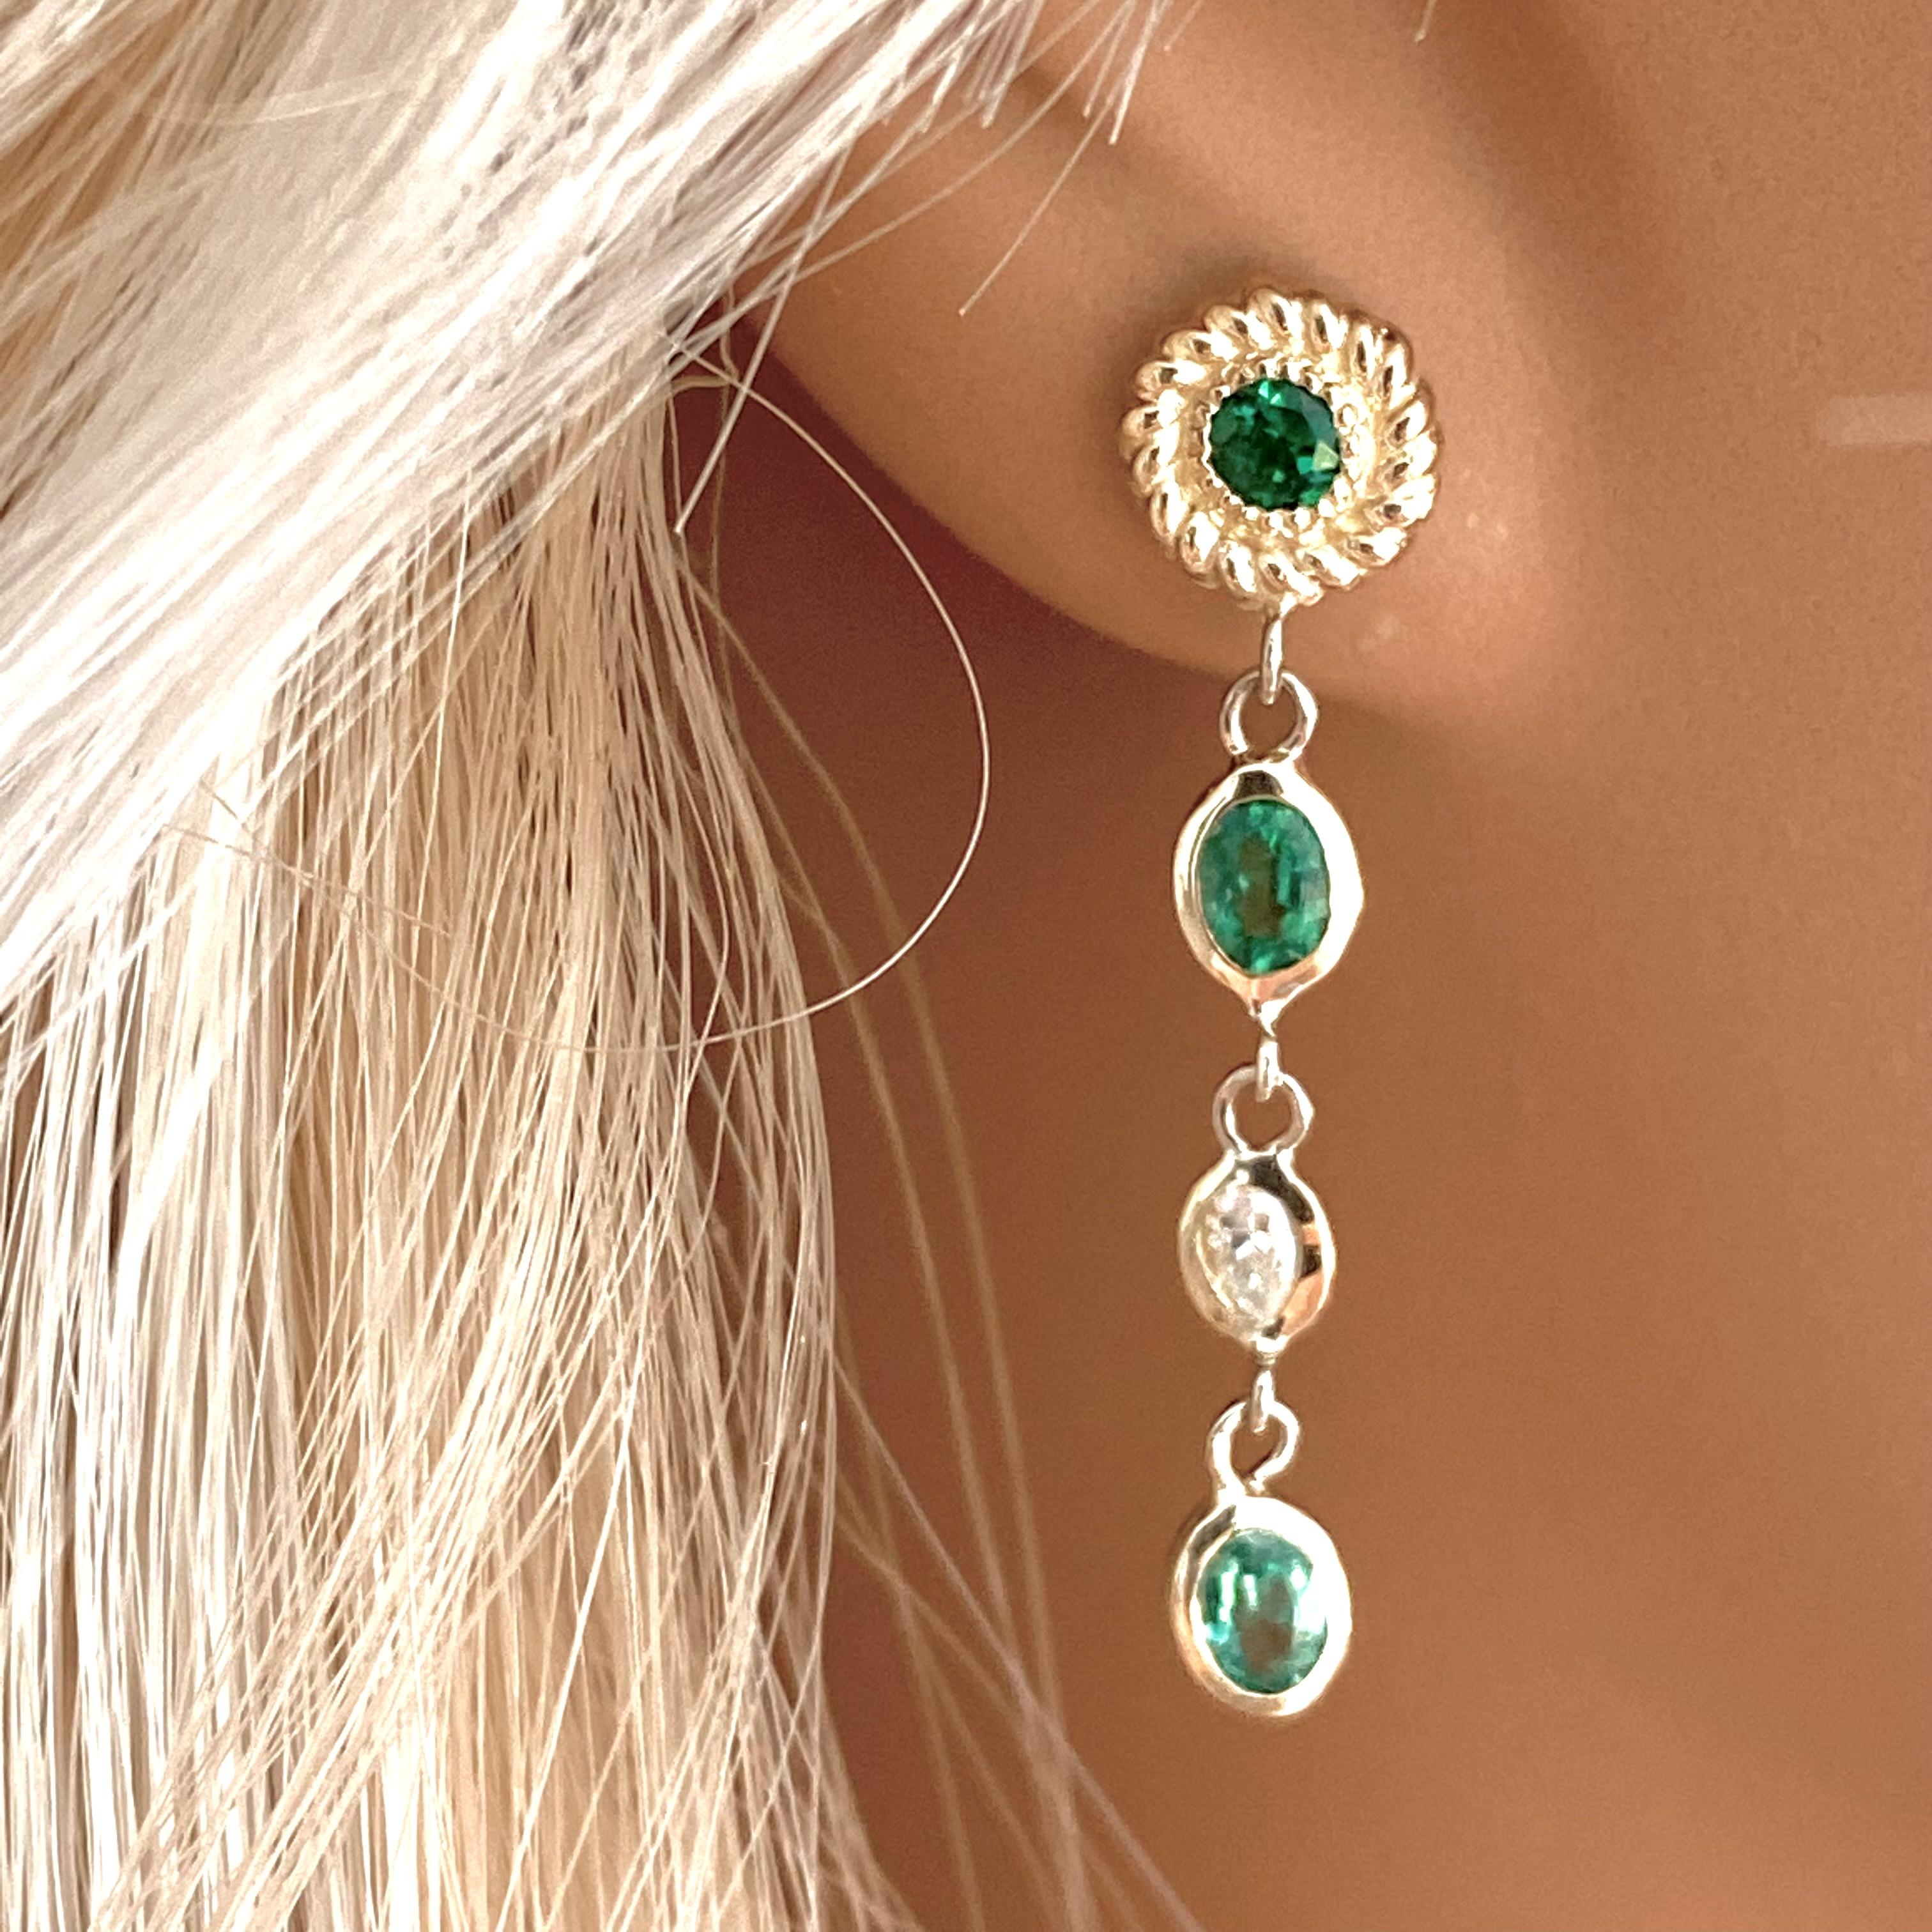 Fourteen karats yellow gold diamond and emerald drop earrings 
Four oval emeralds weighing 0.85 carats
Two round emeralds weighing 0.30 carats
Two diamond weighing 0.20 carat 
New Earrings
Handmade in the USA 
Our design team select gemstones for